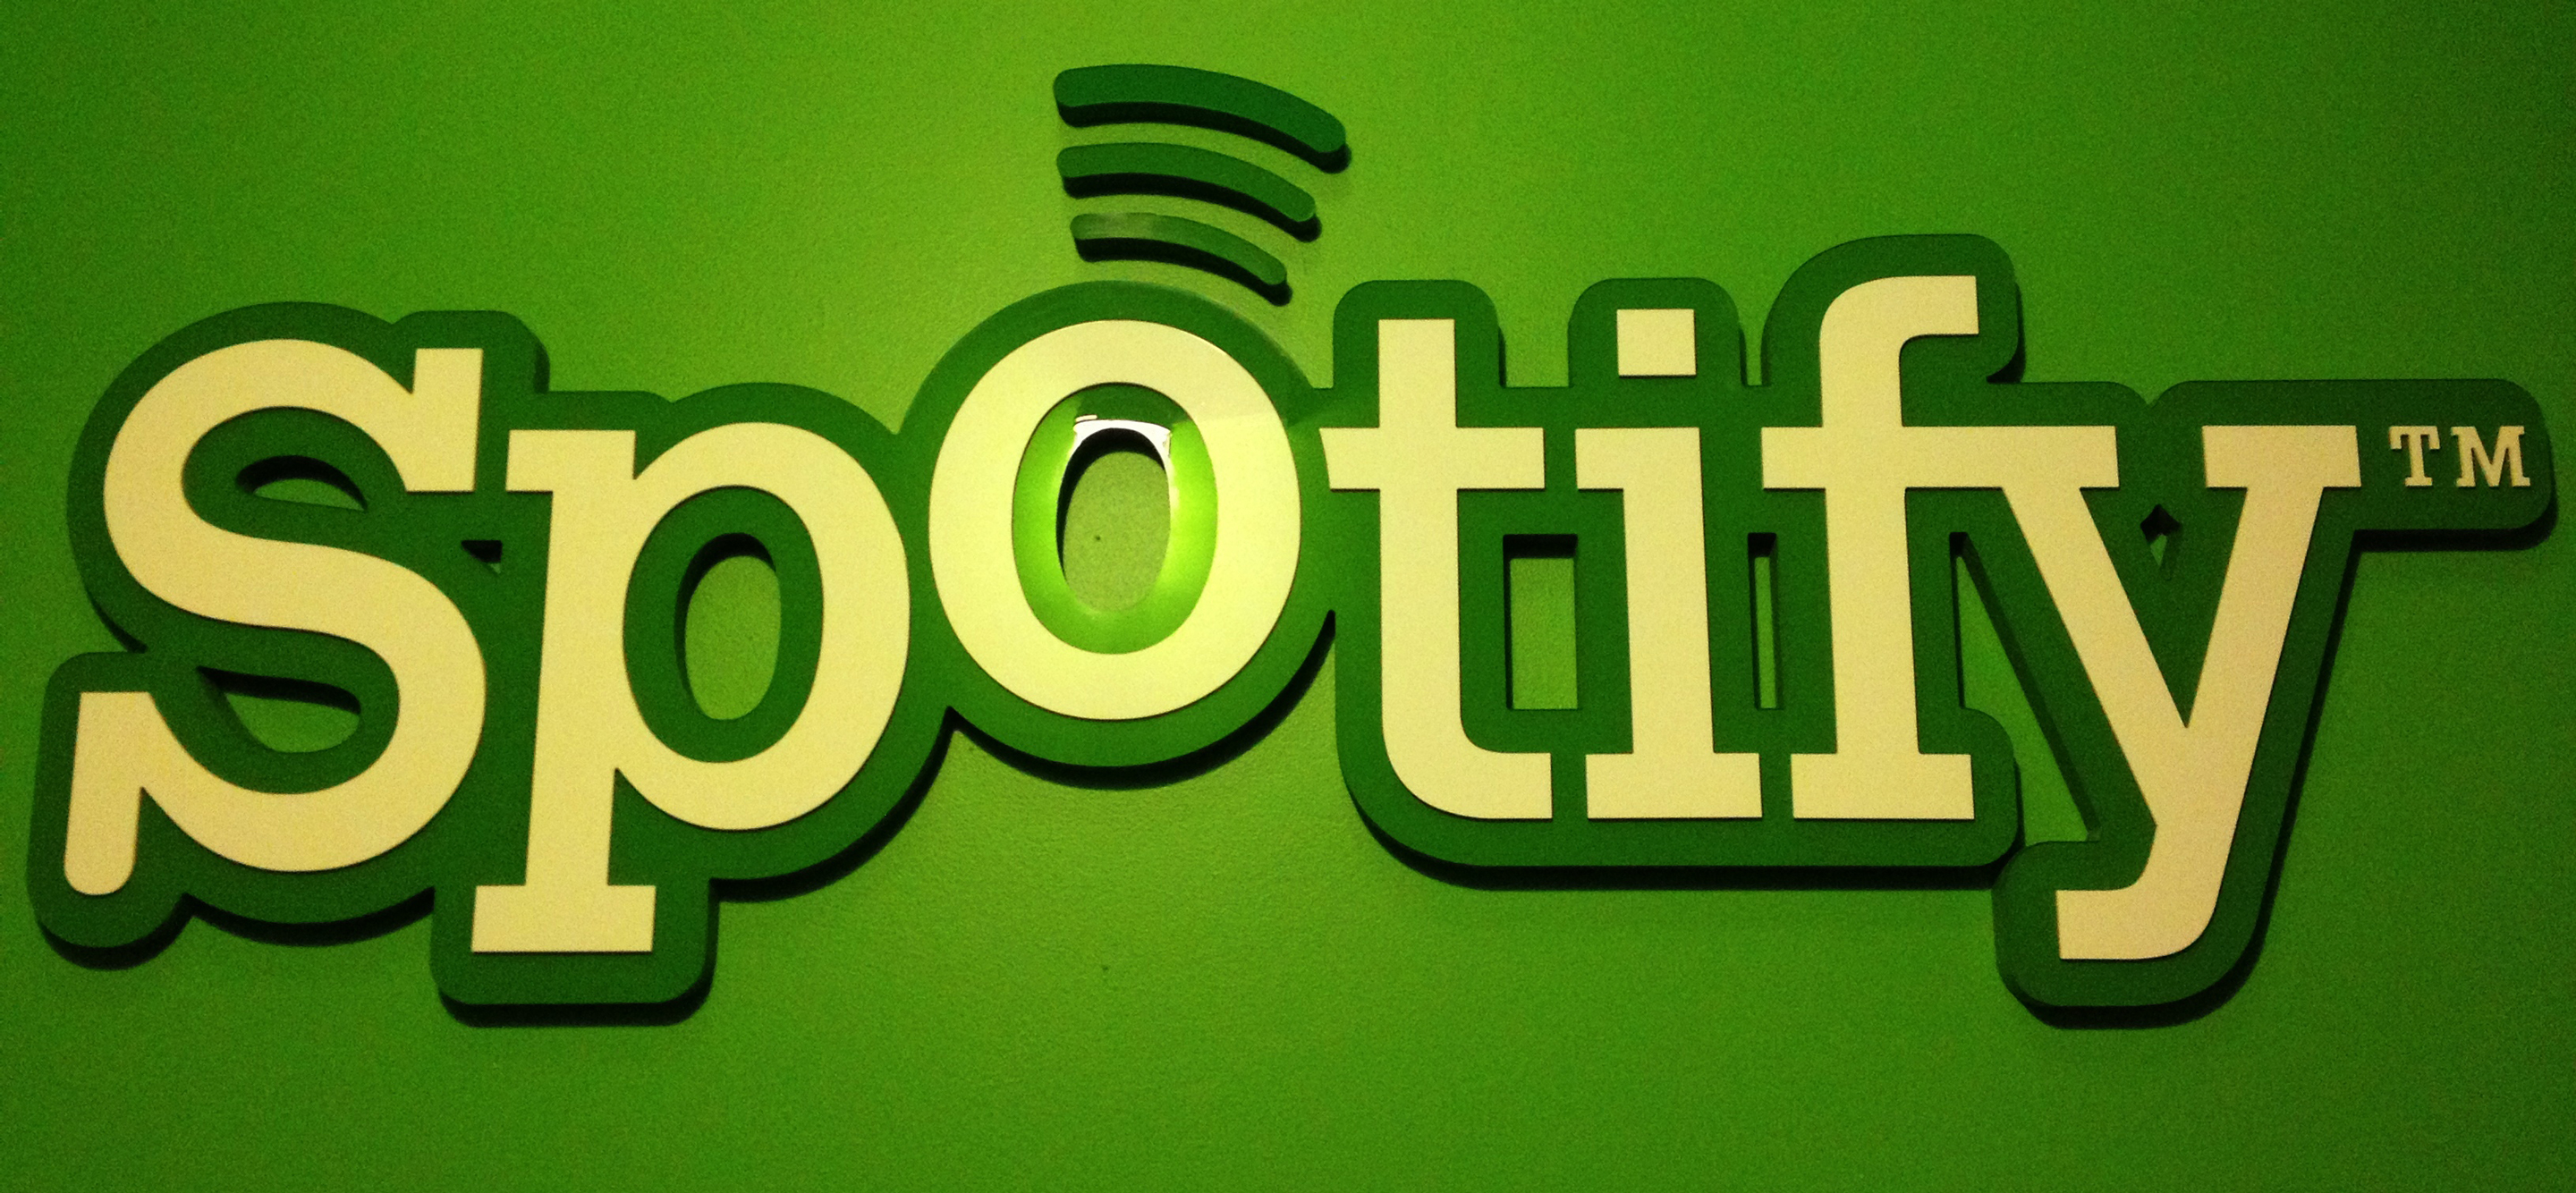 Row over study: Does Spotify hurt record sales or not?